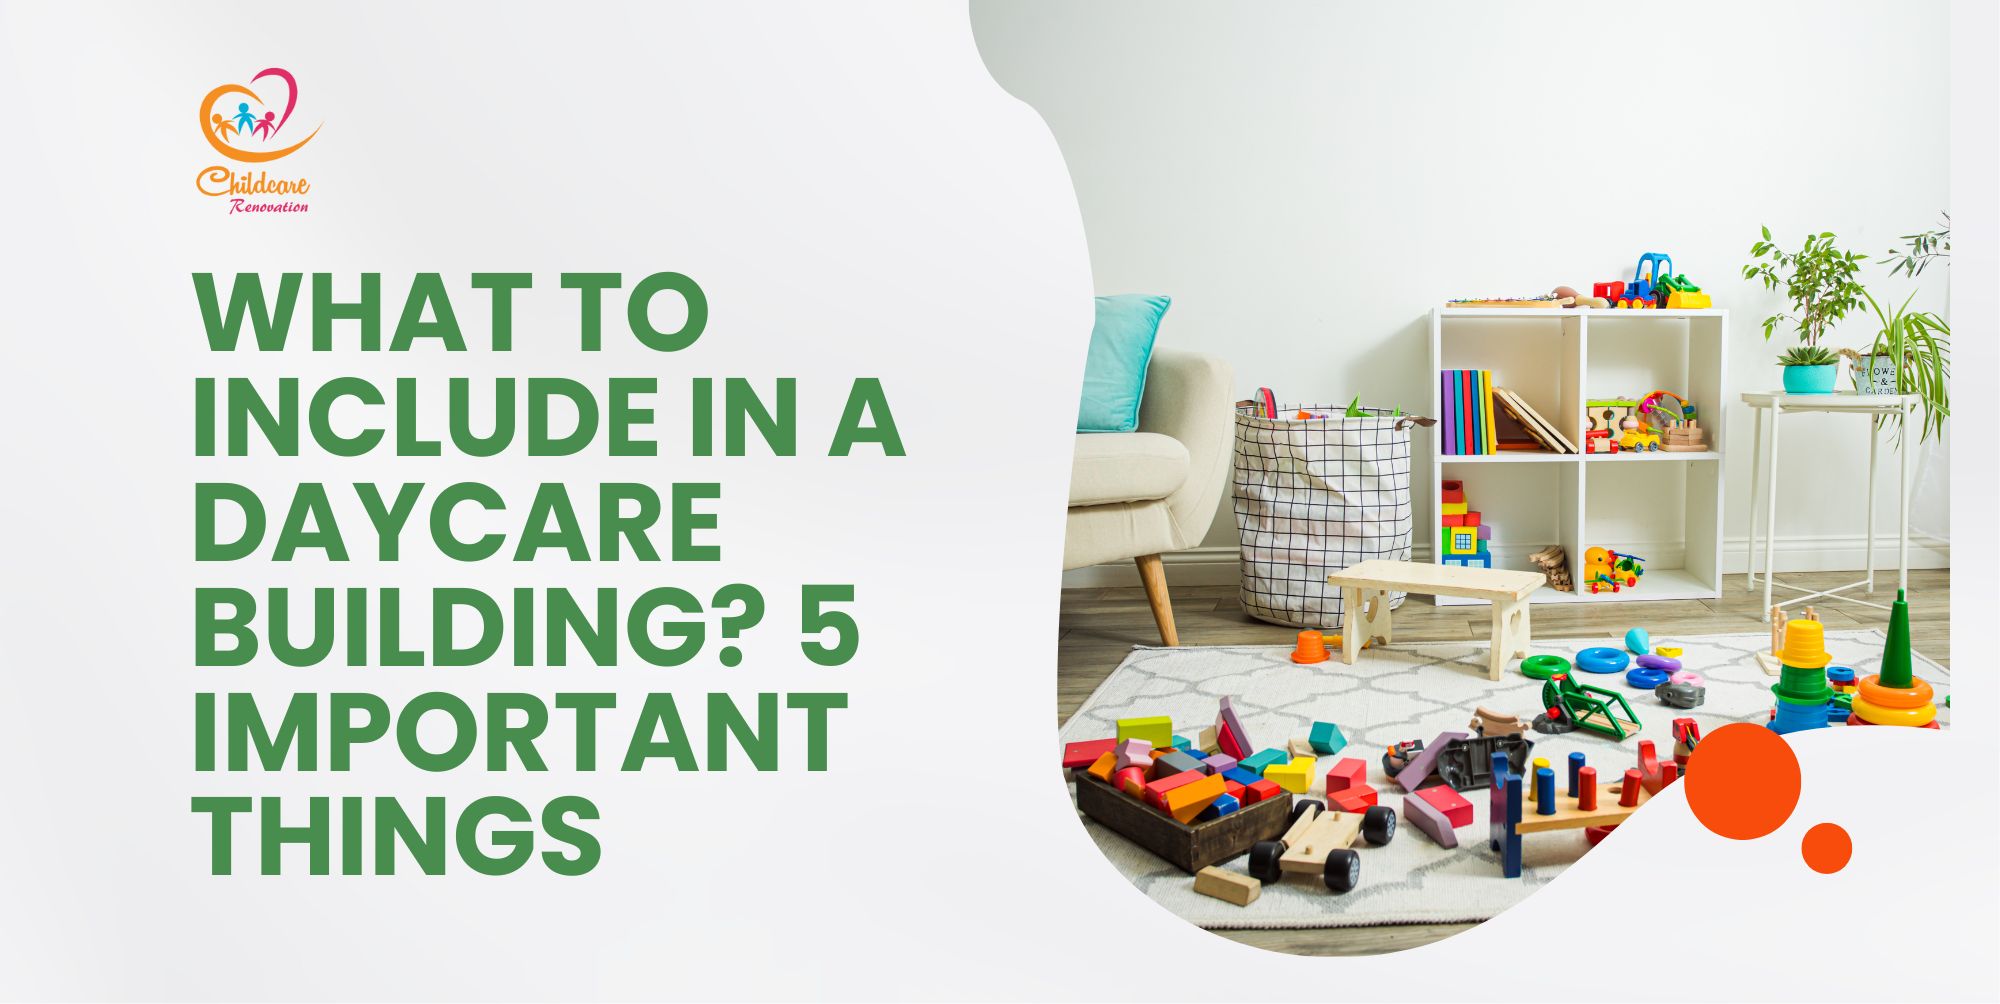 No Idea What To Include In Your Daycare Building? 5 Important Things Children Need In It